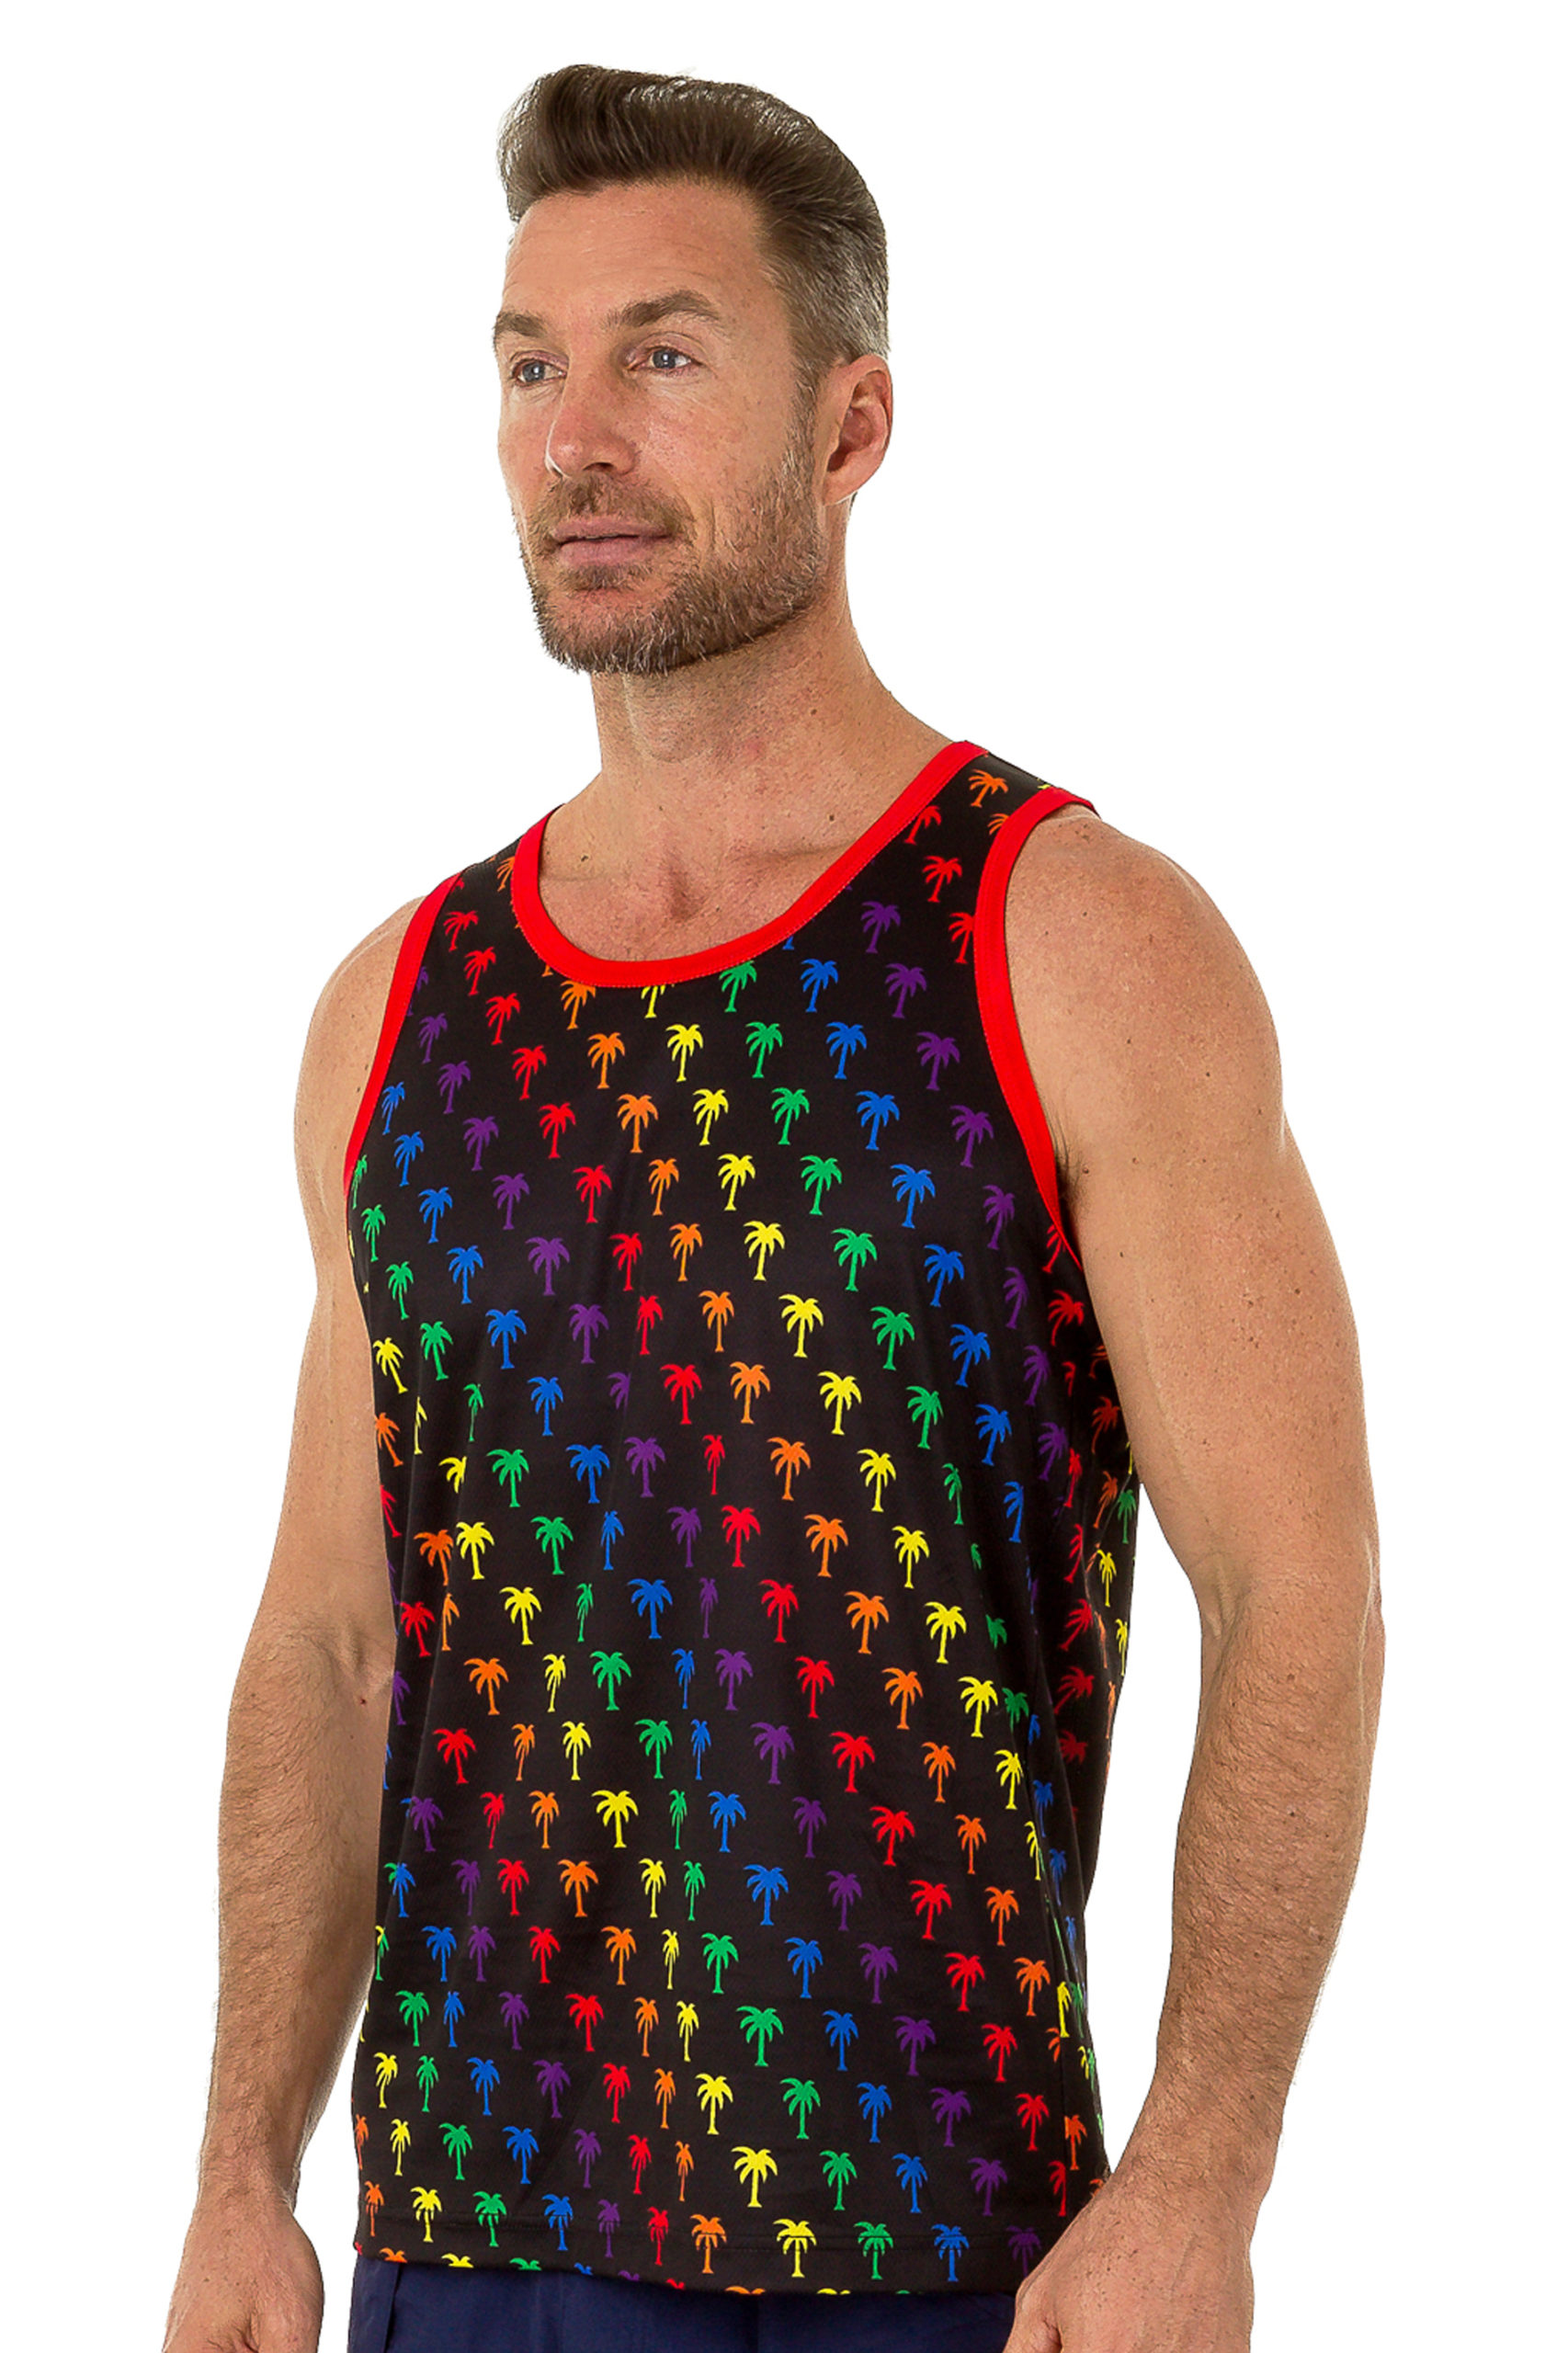 Best Men's Tank Tops For Sale. Coolest Tank Tops For Guys. Pride Palms